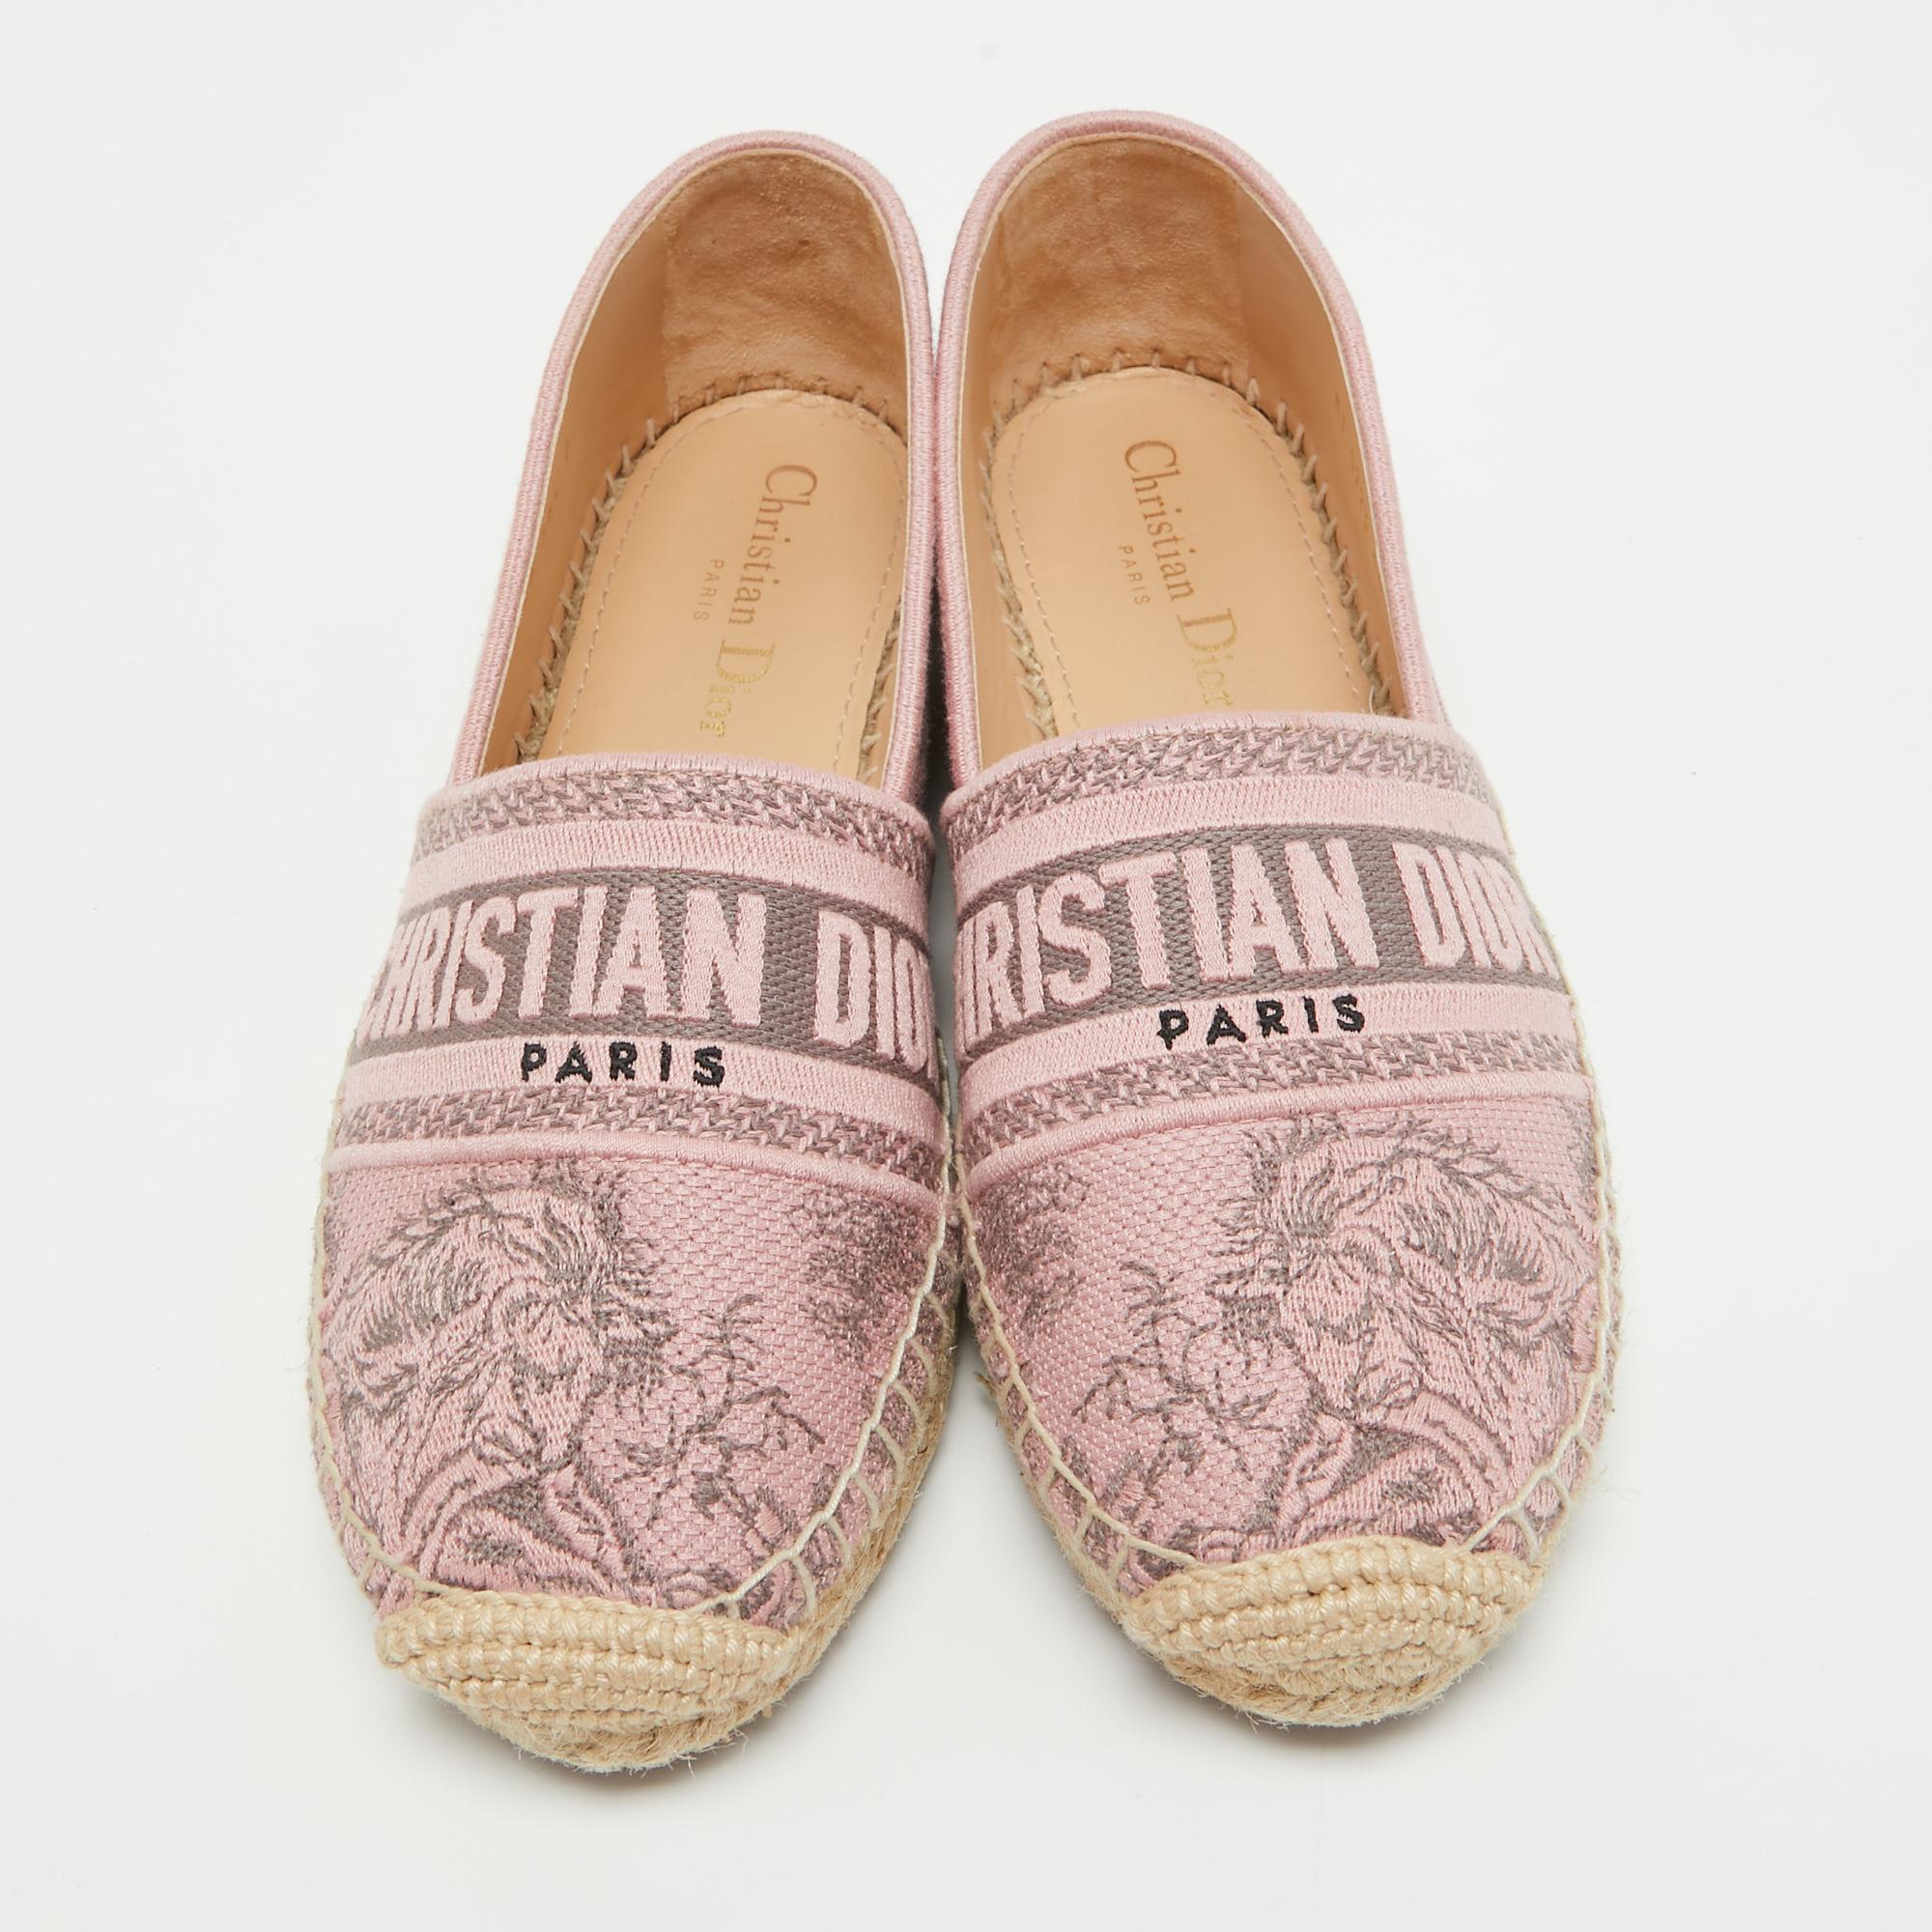 Let this comfortable pair be your first choice when you're out for a long day. These Dior espadrilles have well-sewn uppers beautifully set on durable soles.

